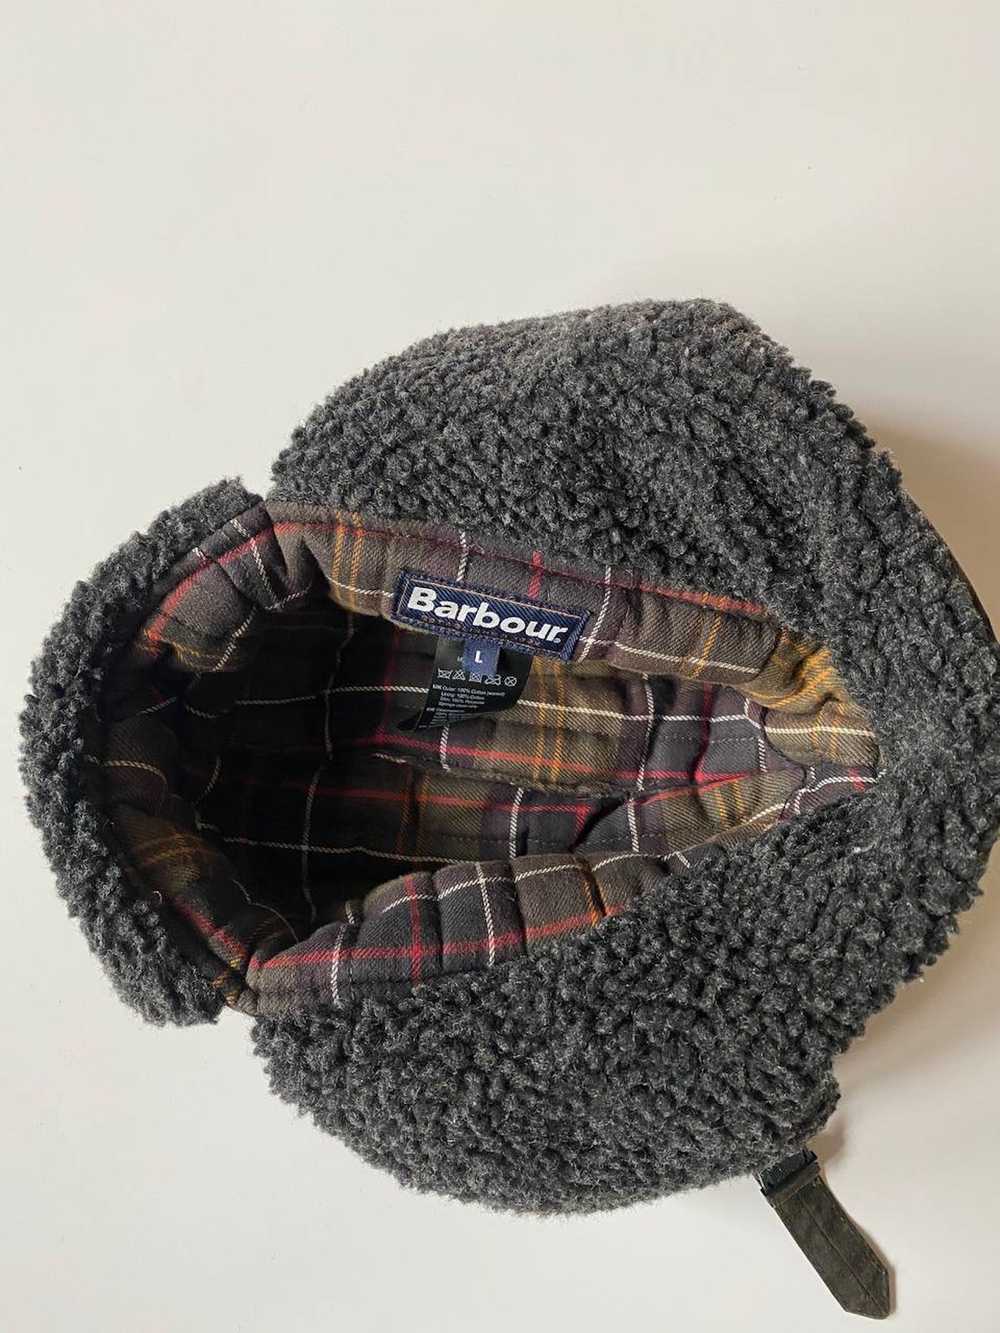 Barbour Barbour Wax Winter Hat size Large - image 4